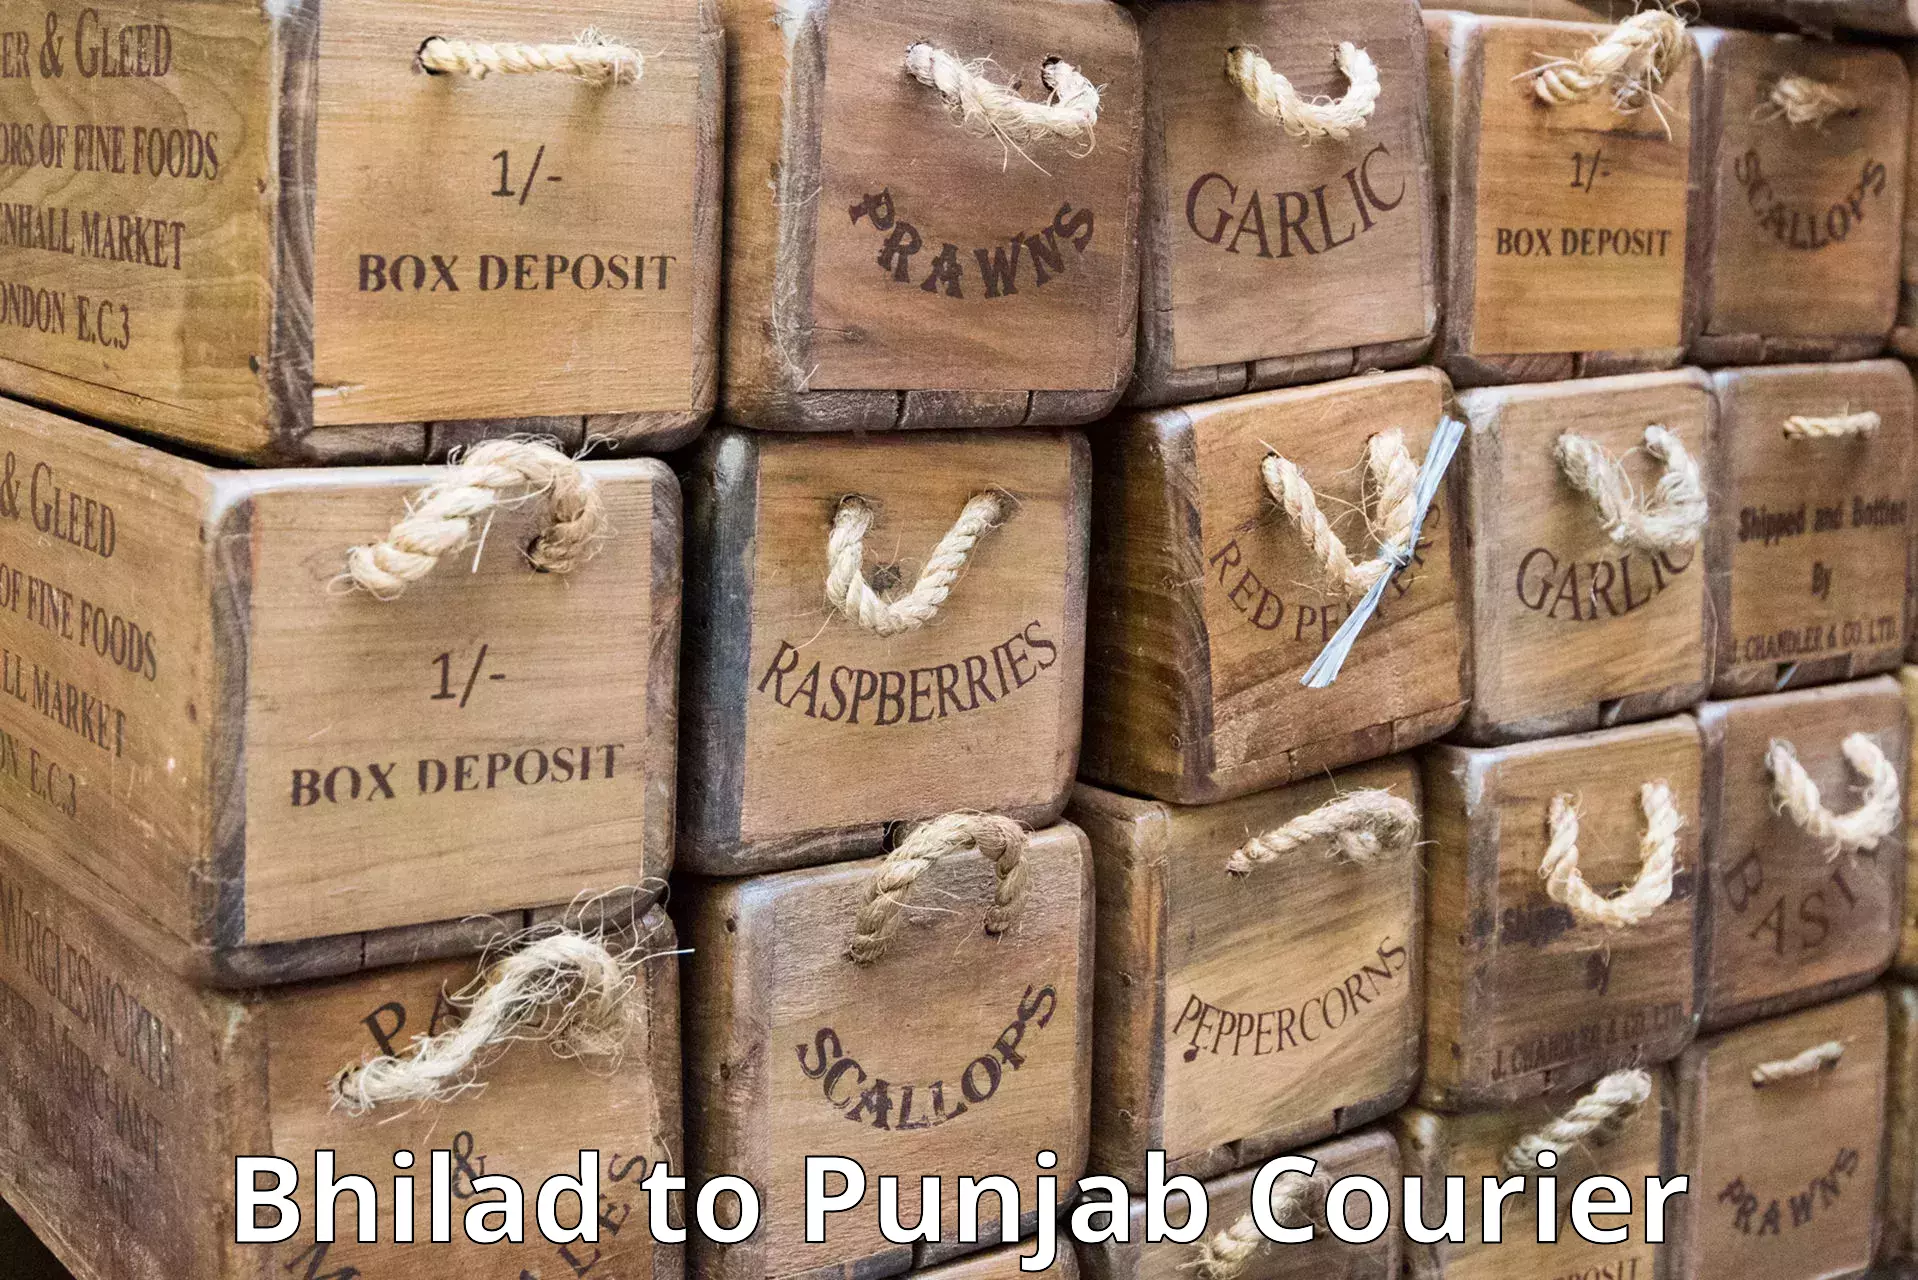 Dynamic courier operations Bhilad to Mohali